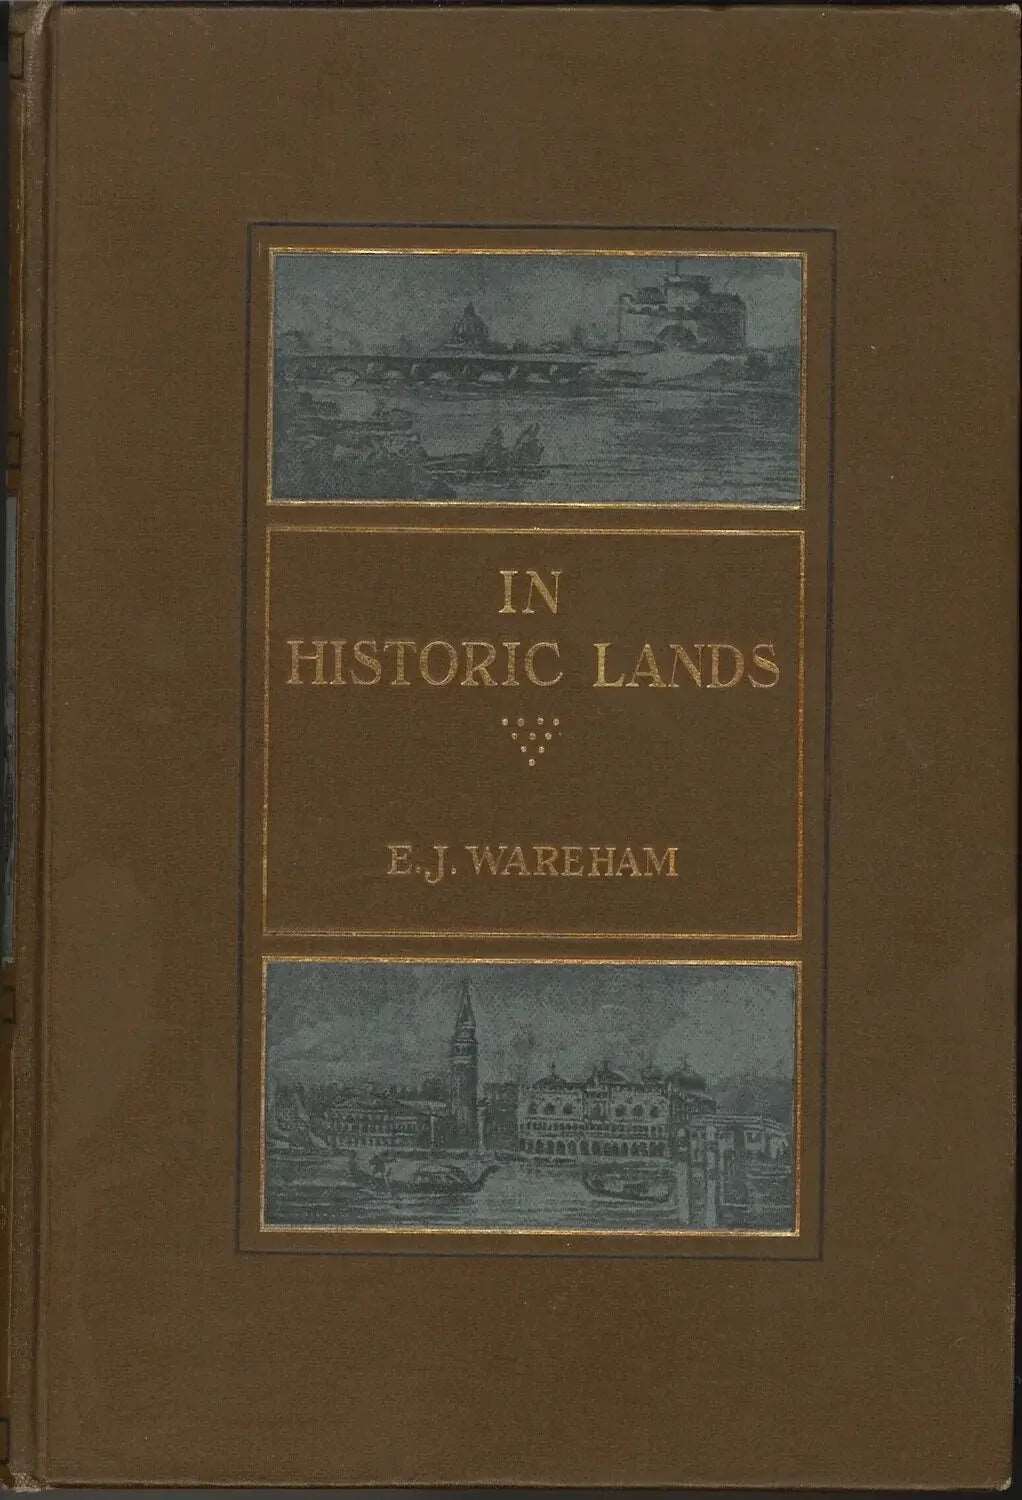 In Historic Lands by E. J. Wareham